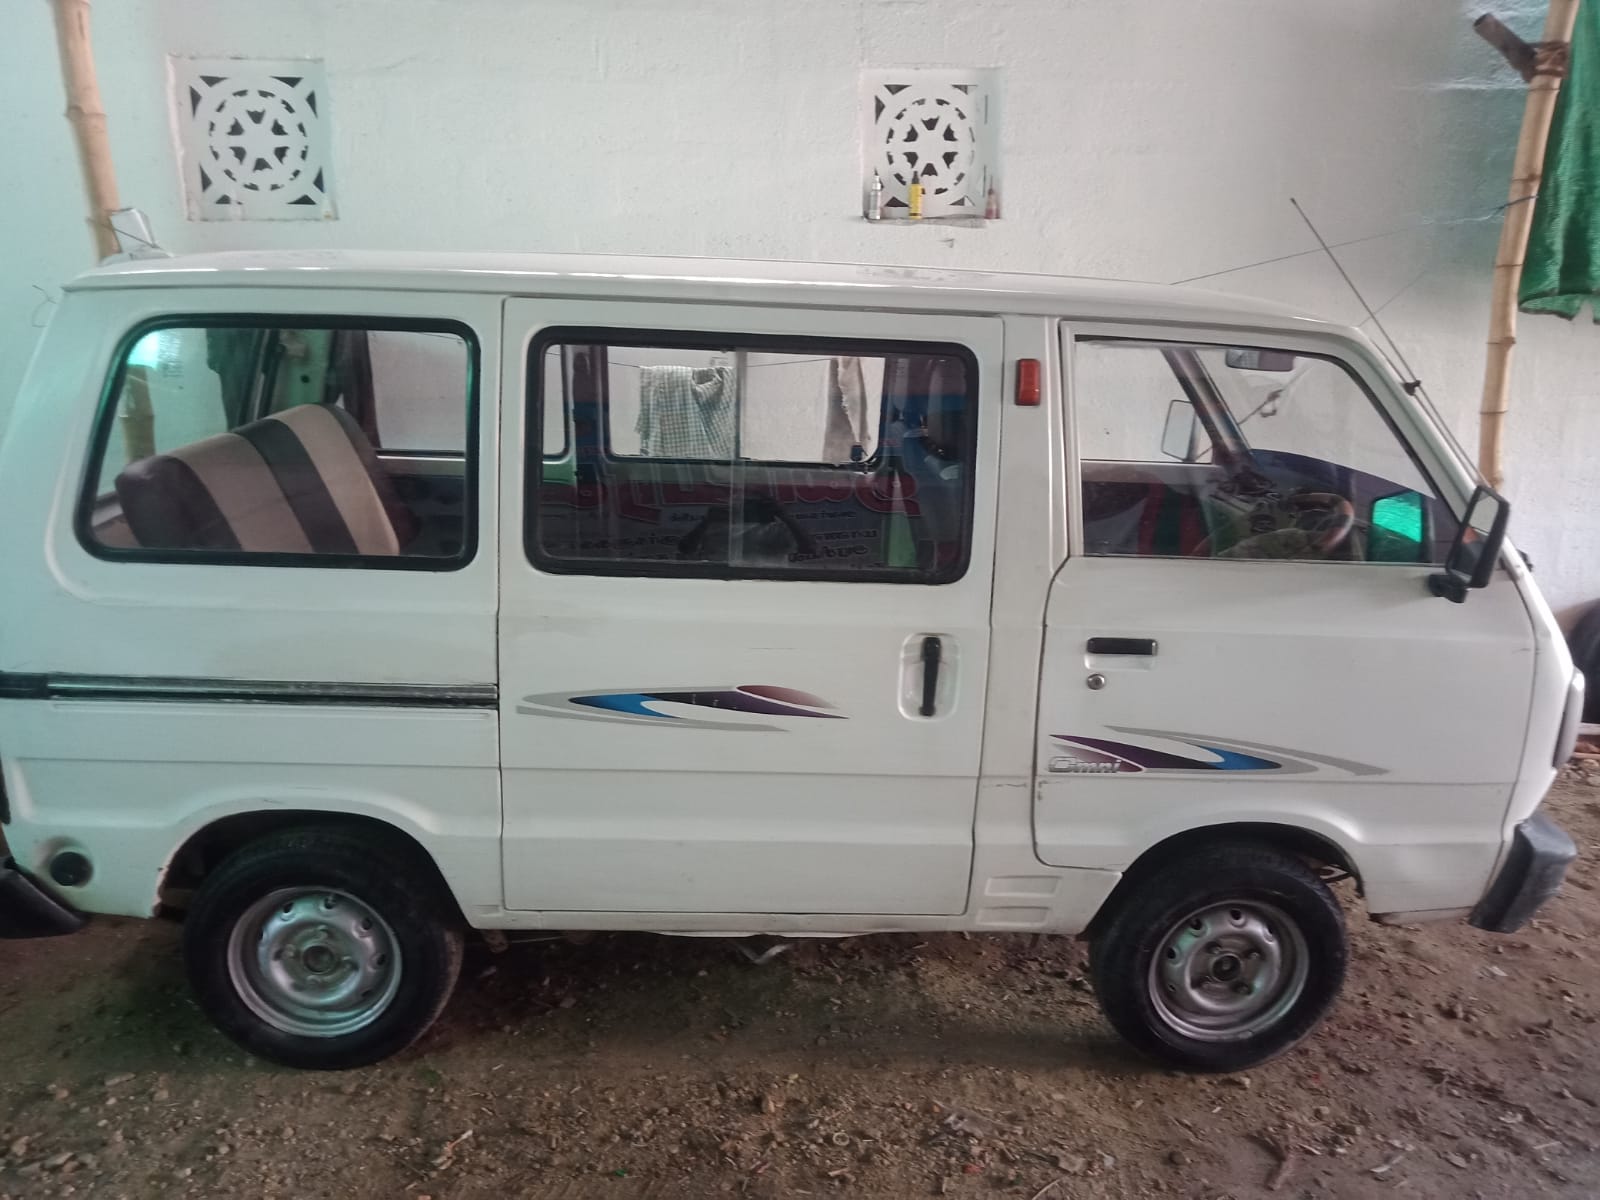 4326-for-sale-Maruthi-Suzuki-Omni-Petrol-First-Owner-2010-TN-registered-rs-178000